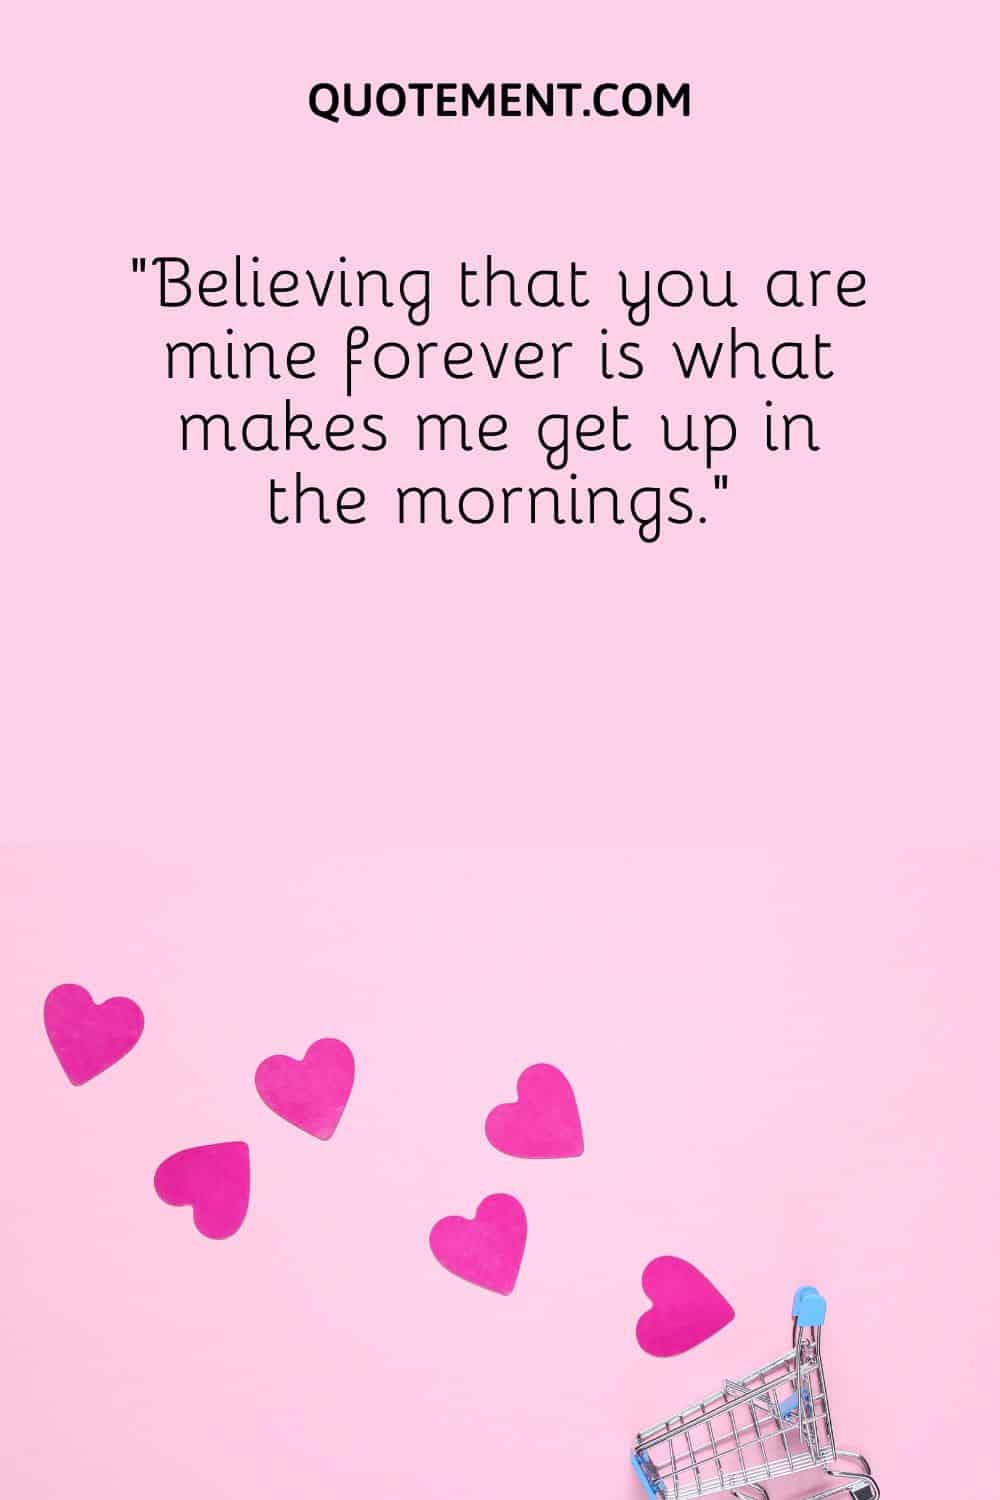 “Believing that you are mine forever is what makes me get up in the mornings.”